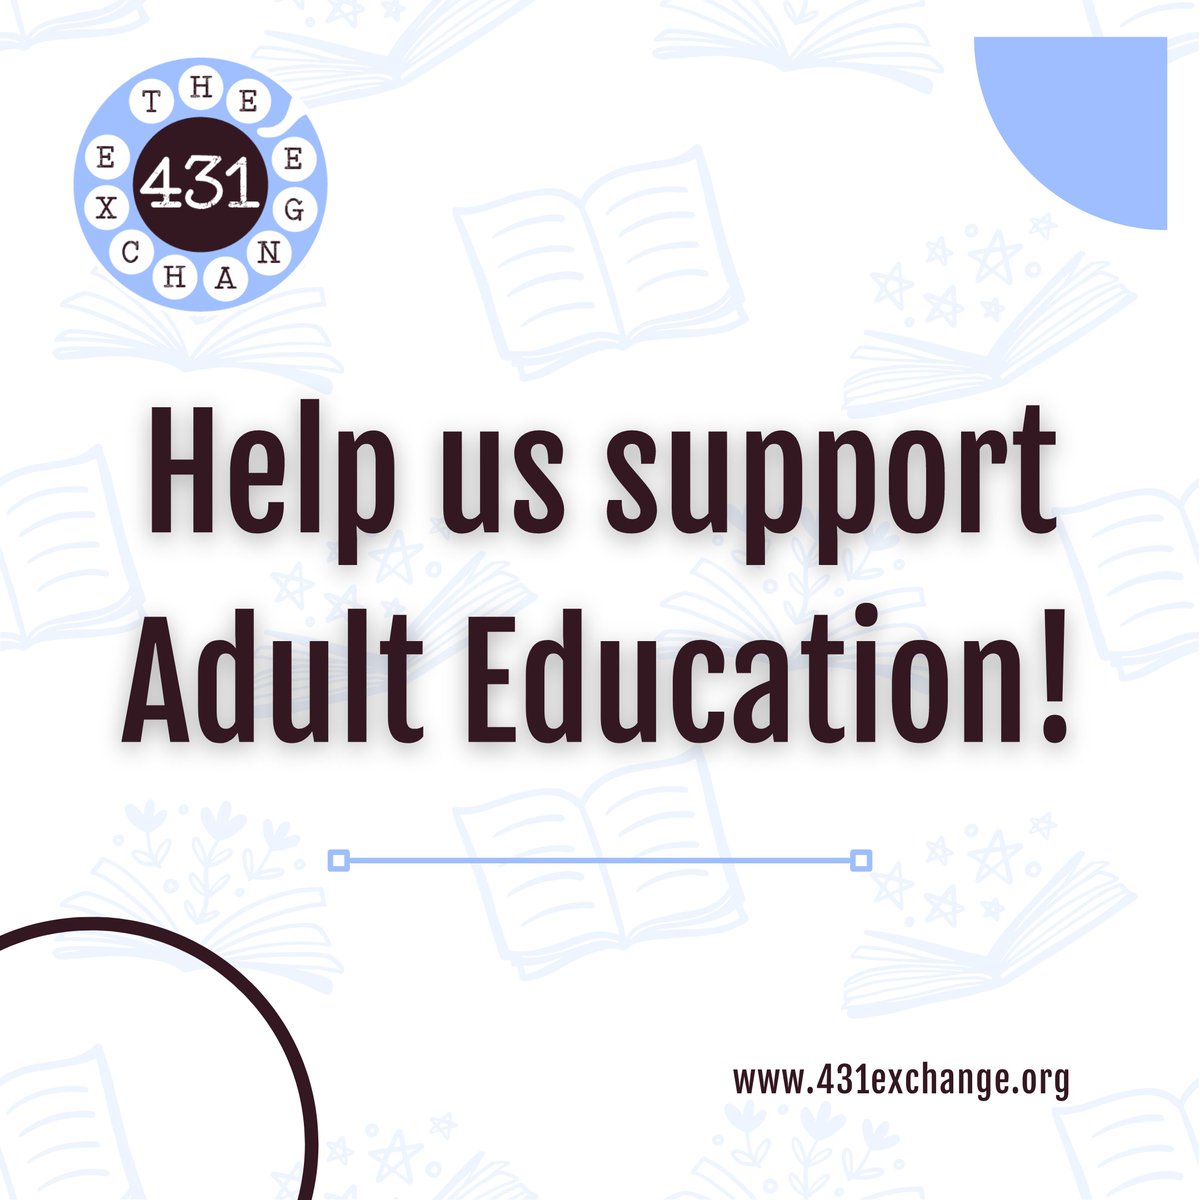 📚 At the 431 Exchange, our mission is to support adult learners in pursuing higher education and career advancement. Your donation can change a student's life today.

Join us in making a difference! 👇
431exchange.org/donate

#donate #AdultEducation #education #431Exchange